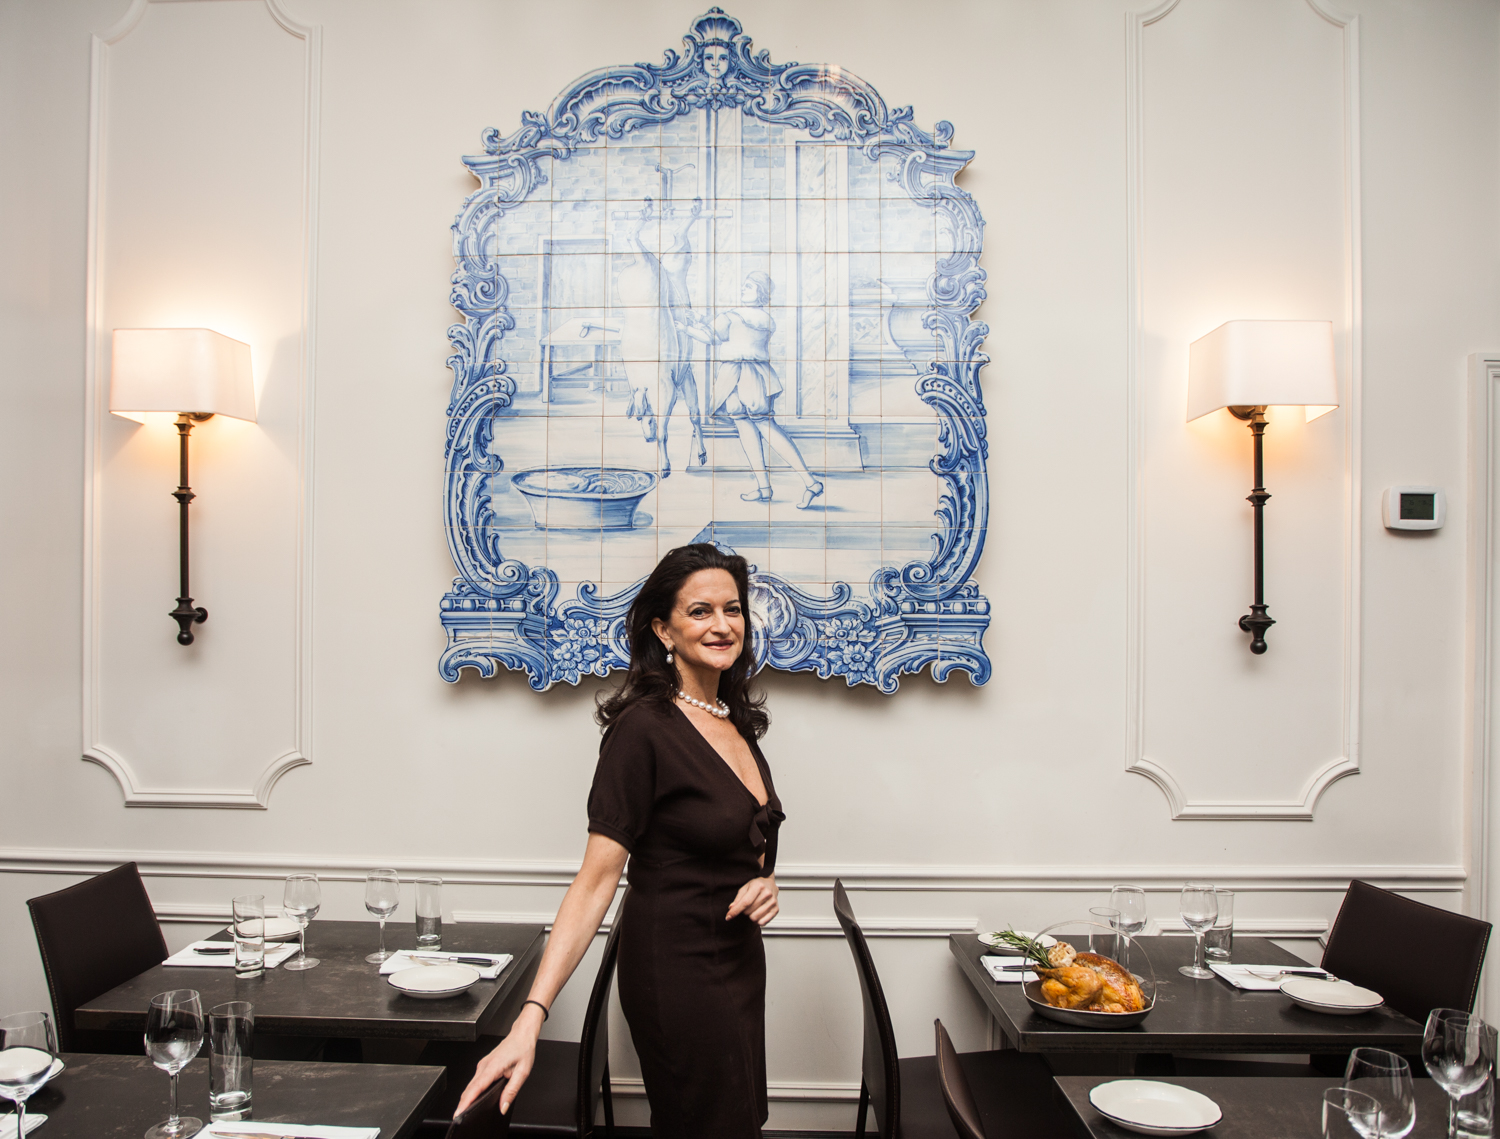 Ms. Farkas with a Portuguese tile mural in her restaurant (Photo: Emily Assiran/New York Observer).